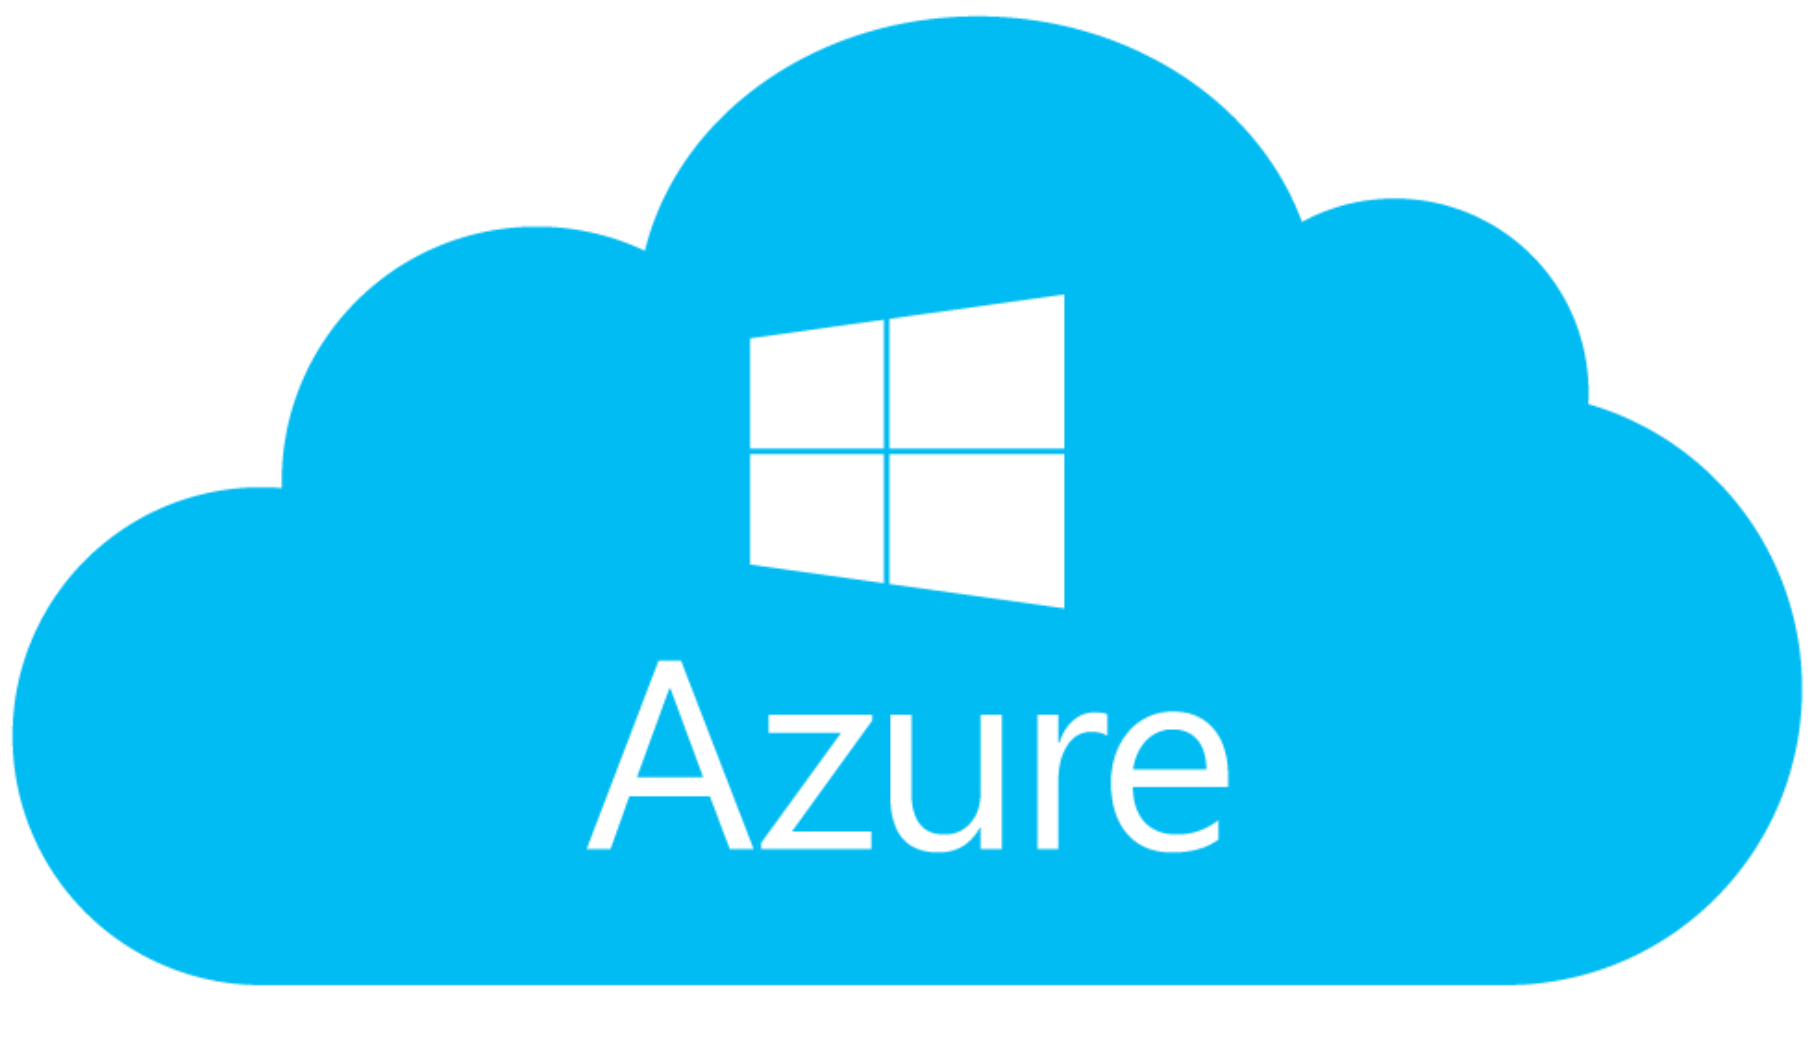 The logo of Microsoft's Azure Marketplace, where you can get started for free with ScaiData's self-service ScaiPlatform for cloud business intelligence and data management and connect to your existing Azure SQL infrastructure